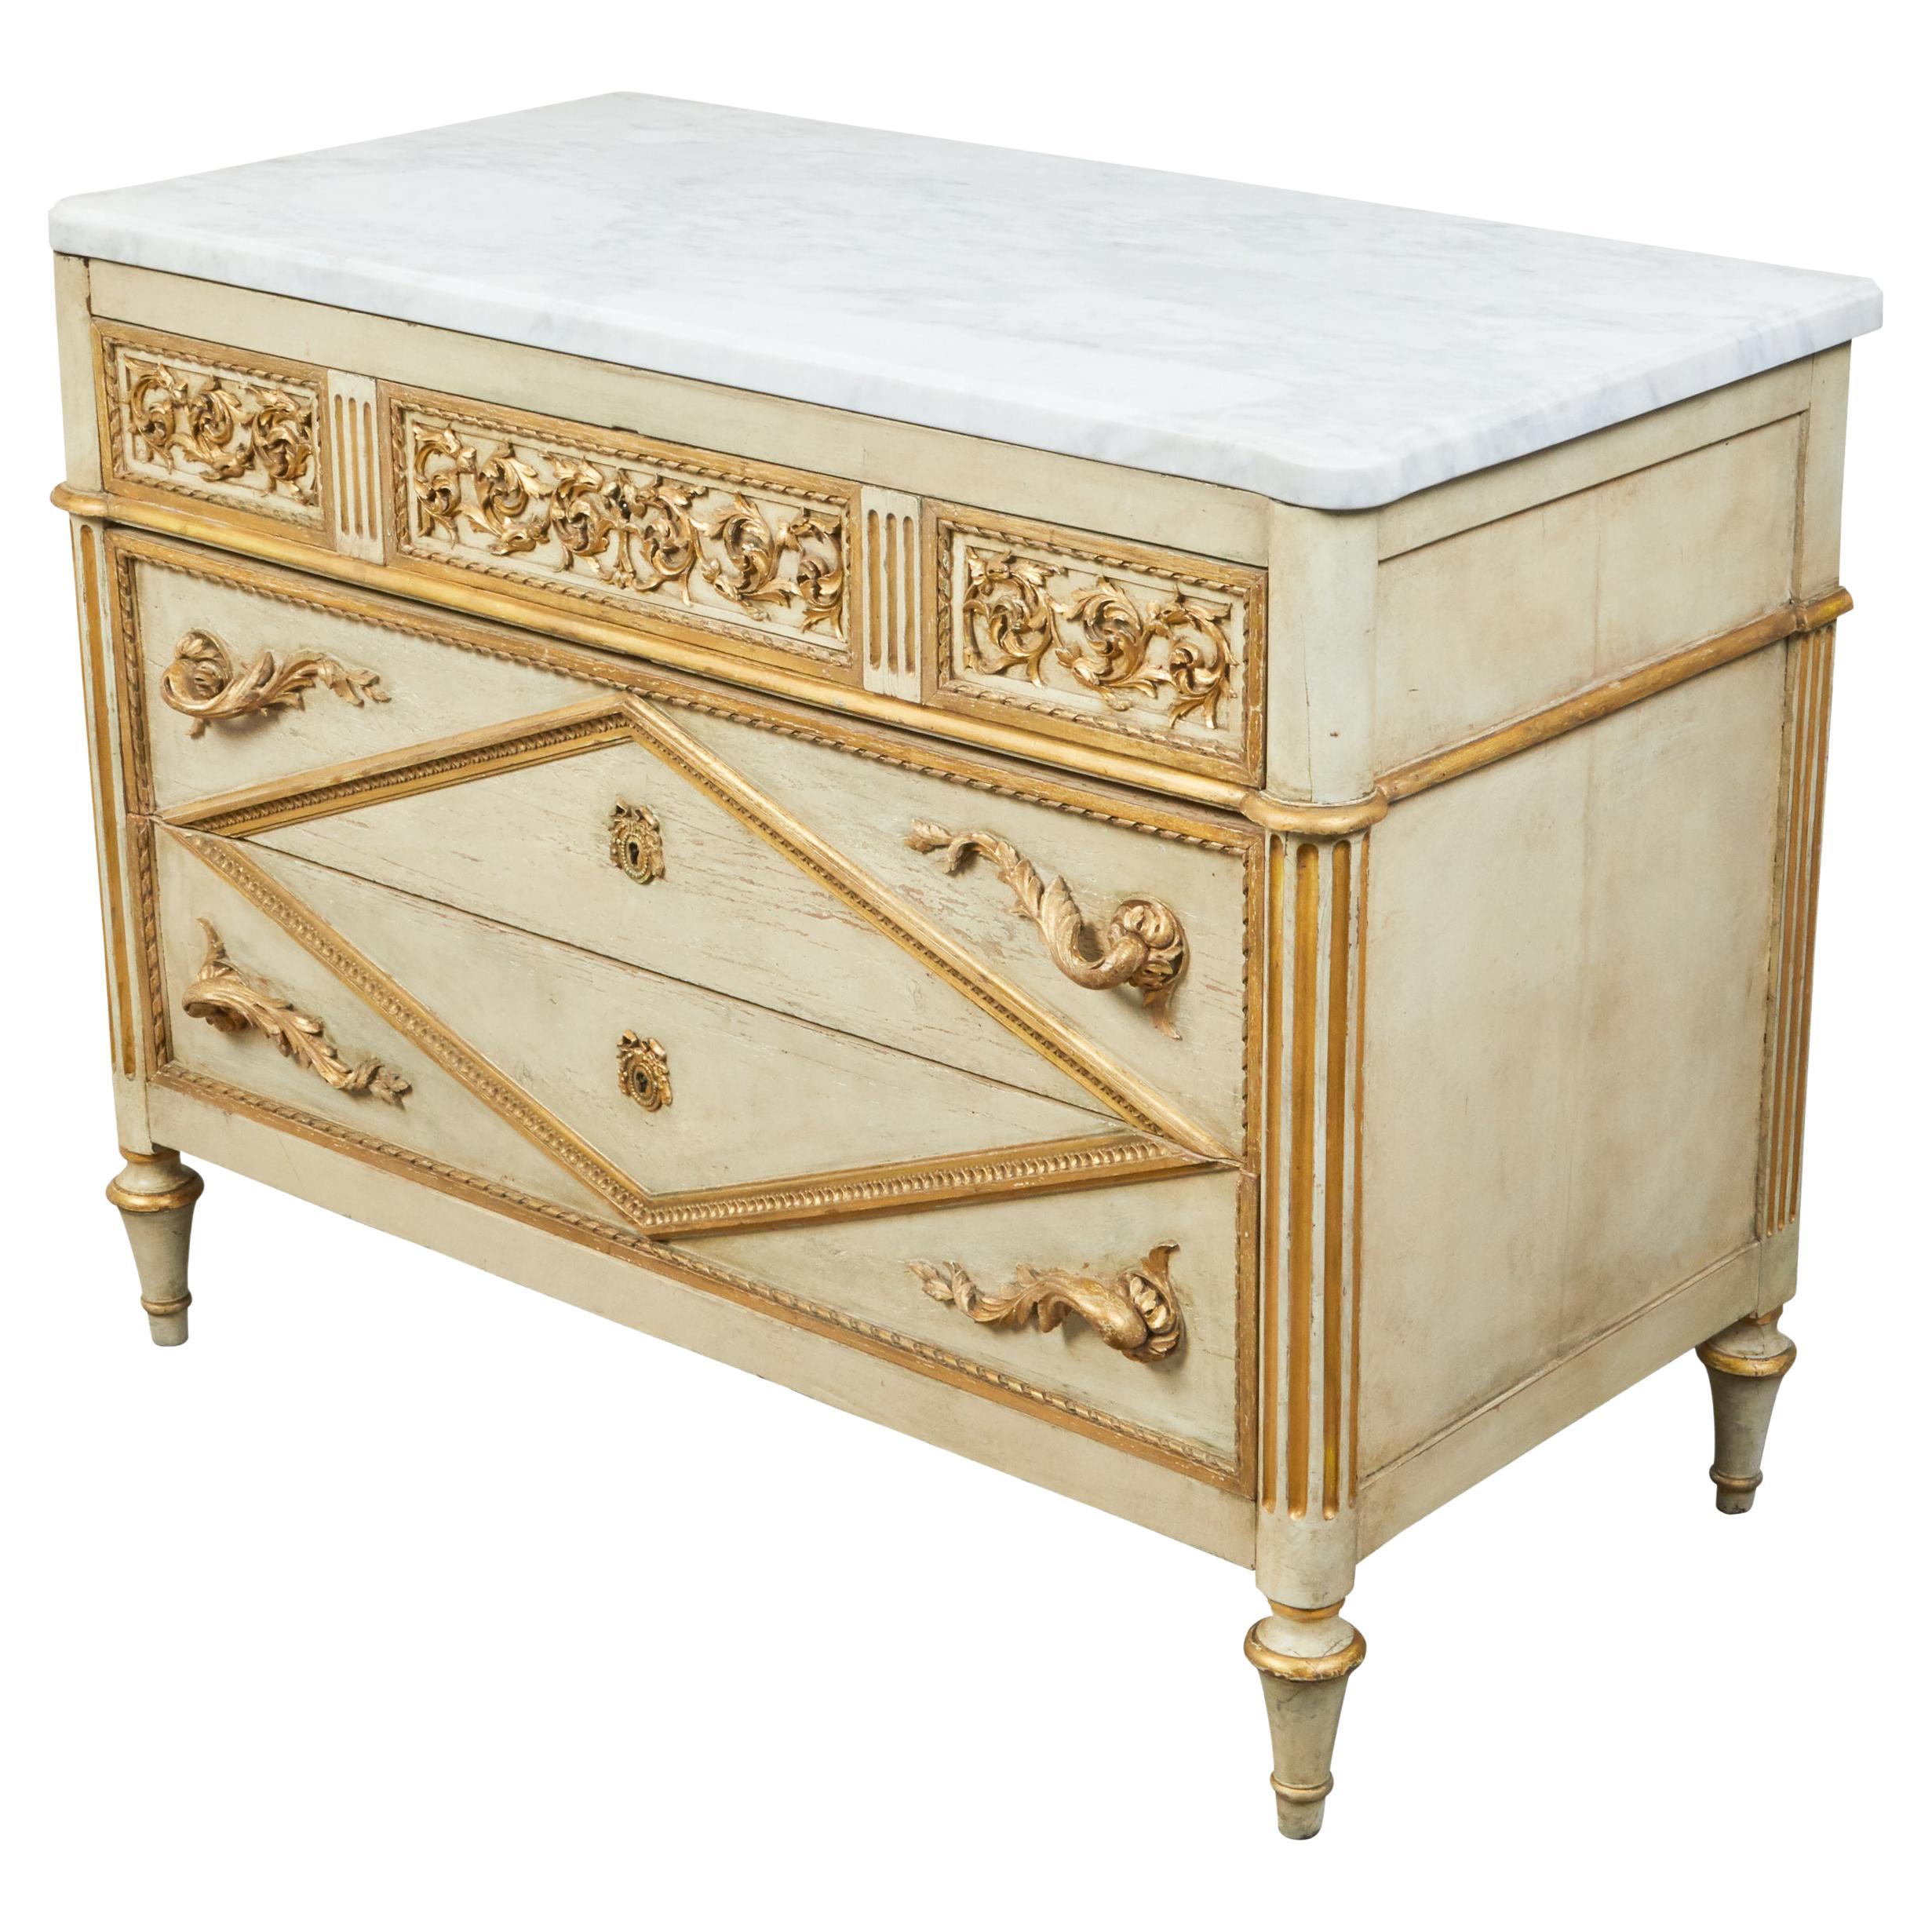 Italian Neoclassical 1800s Three-Drawer Commode with Gilt and Carved Motifs For Sale